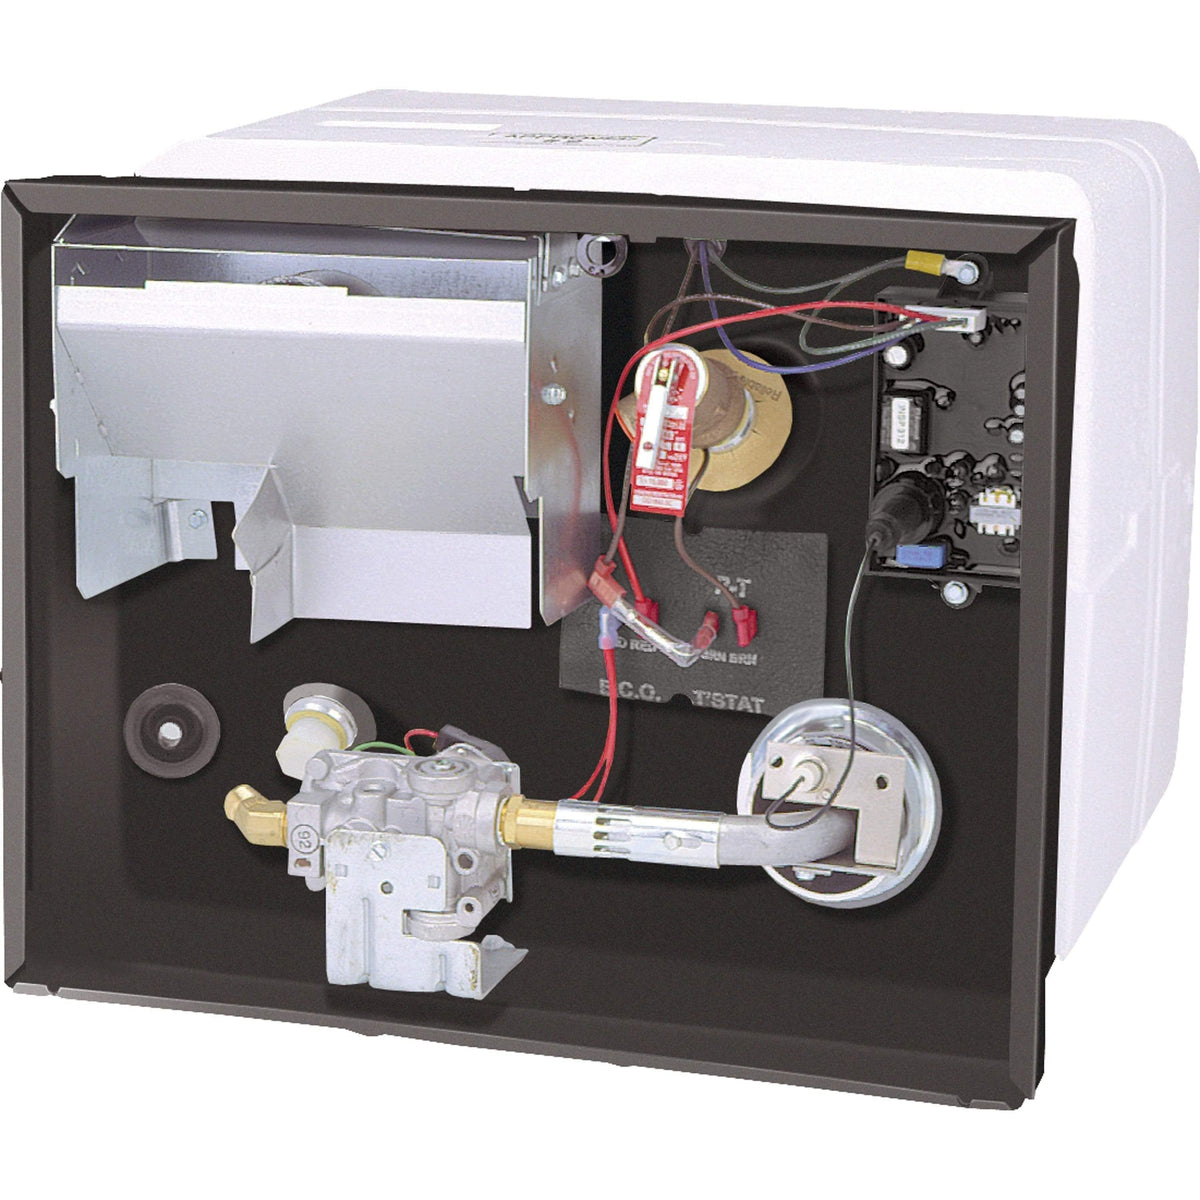 Atwood Mobile Products Not Qualified for Free Shipping Atwood 6-Gallon Gas/Electric with Heat Exchanger #96163